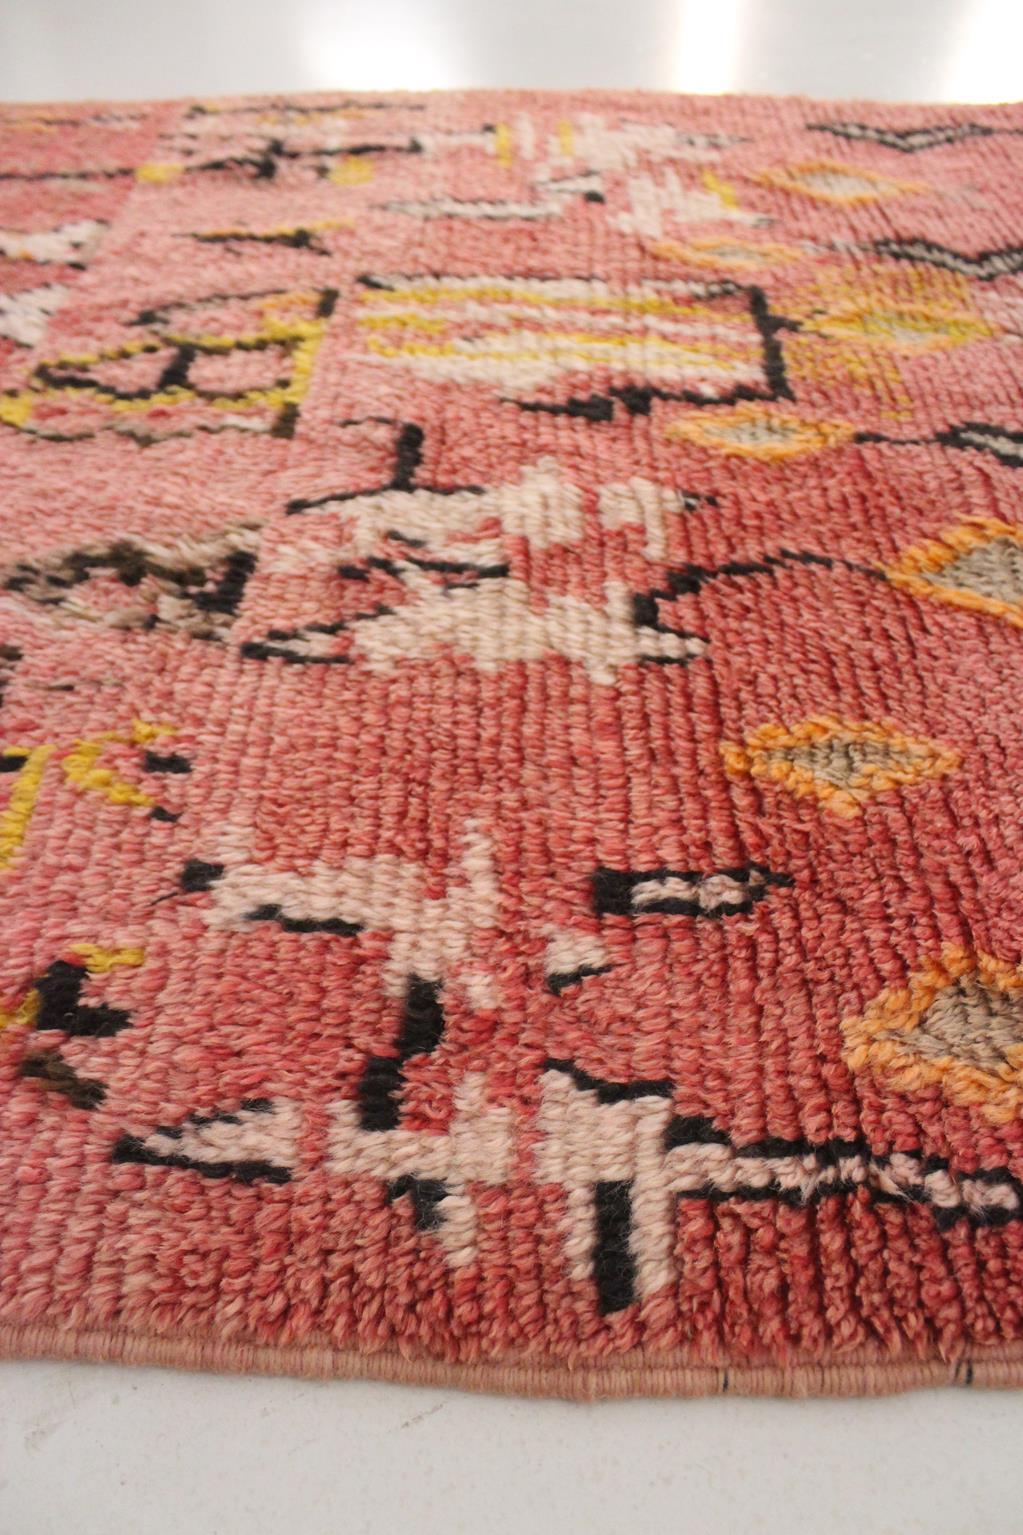 Vintage Moroccan Azilal rug - Pink and yellow - 3.7x7.7feet / 114x236cm For Sale 5